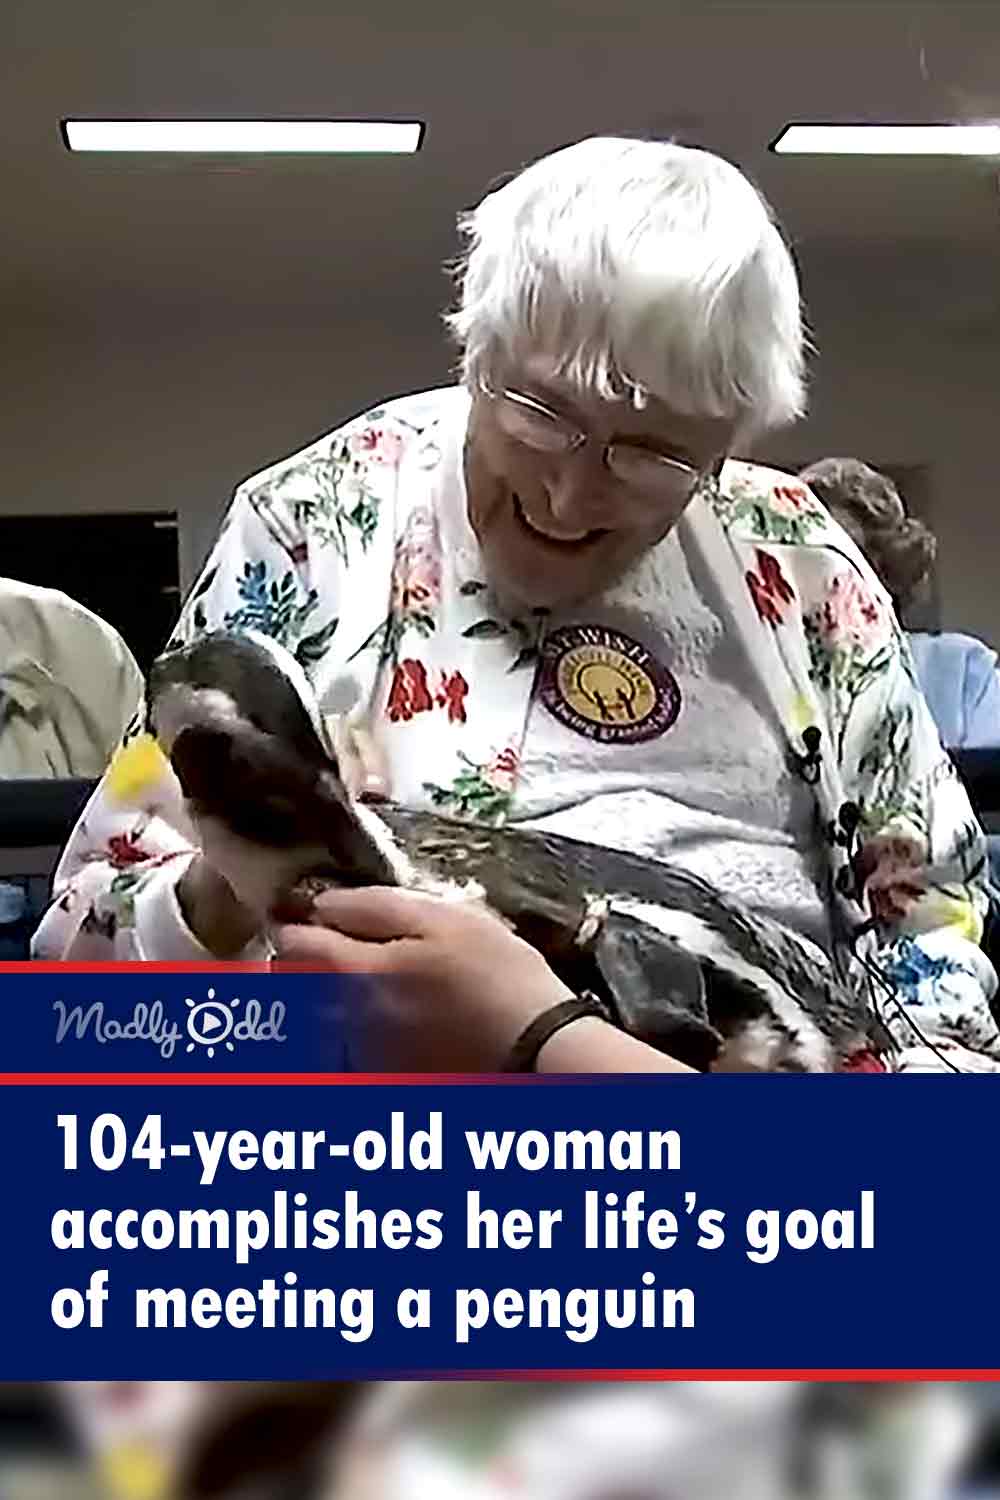 104-year-old woman accomplishes her life’s goal of meeting a penguin